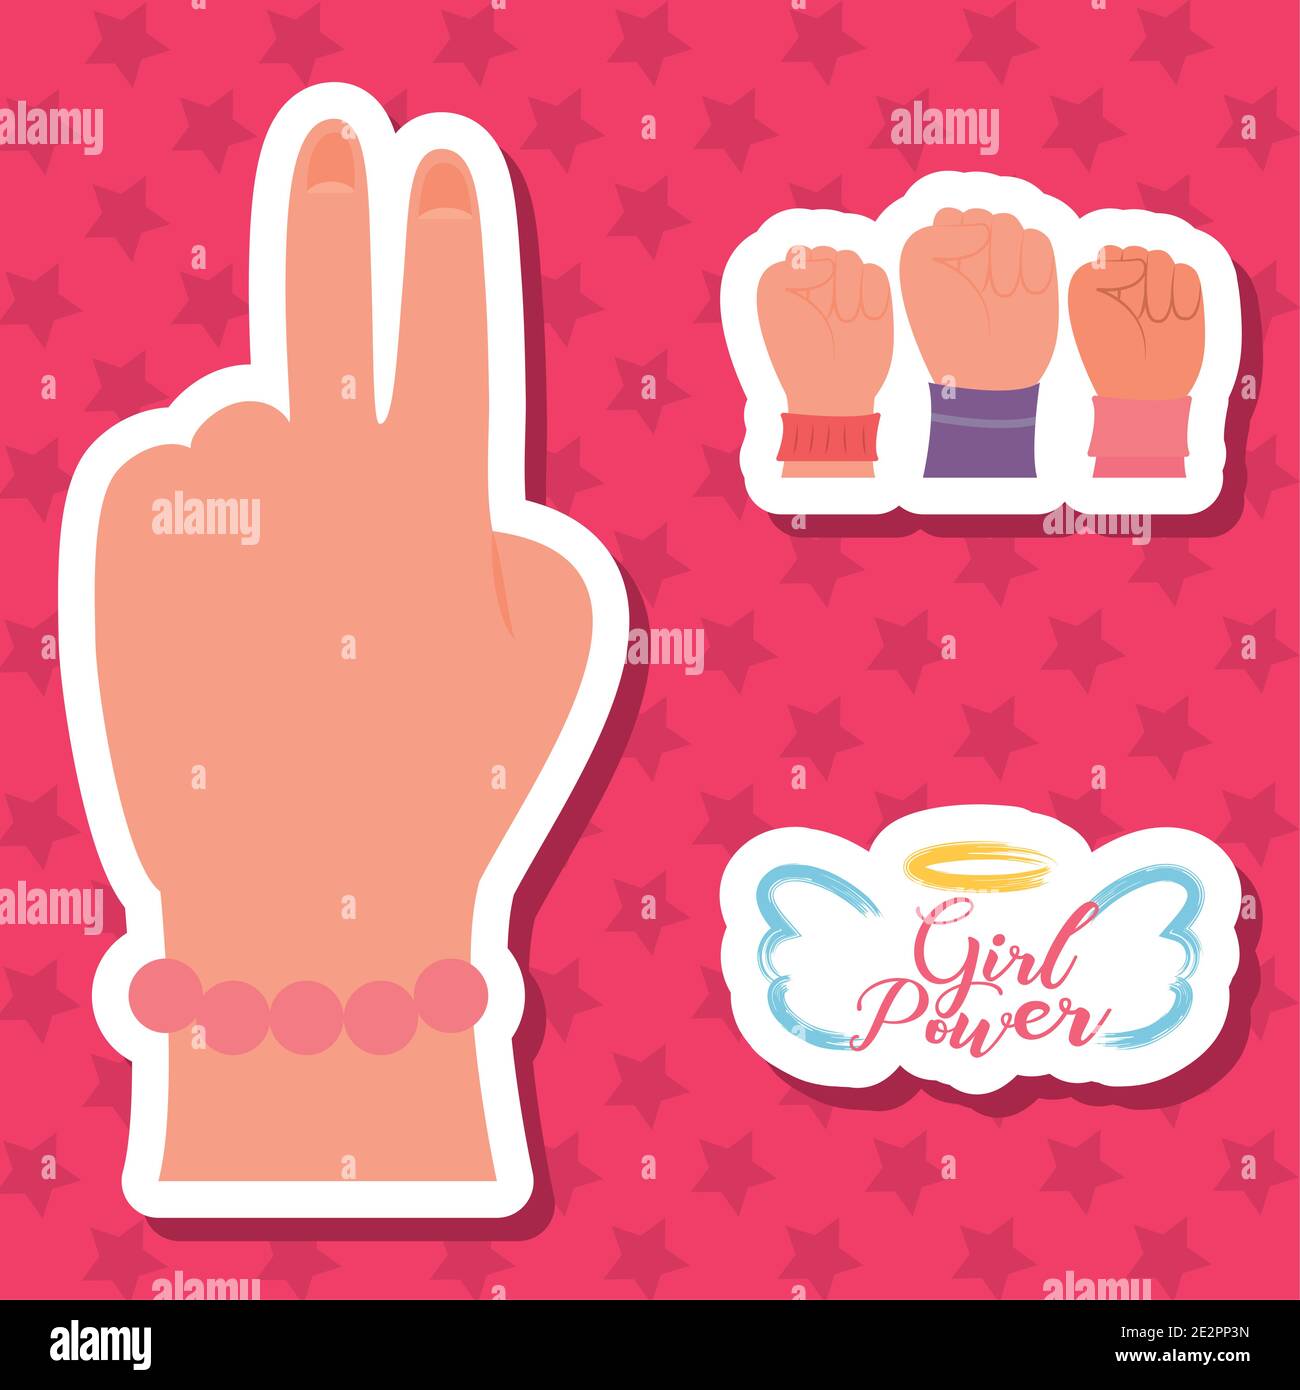 girl power hands icon set over red background, flat style, vector illustration Stock Vector